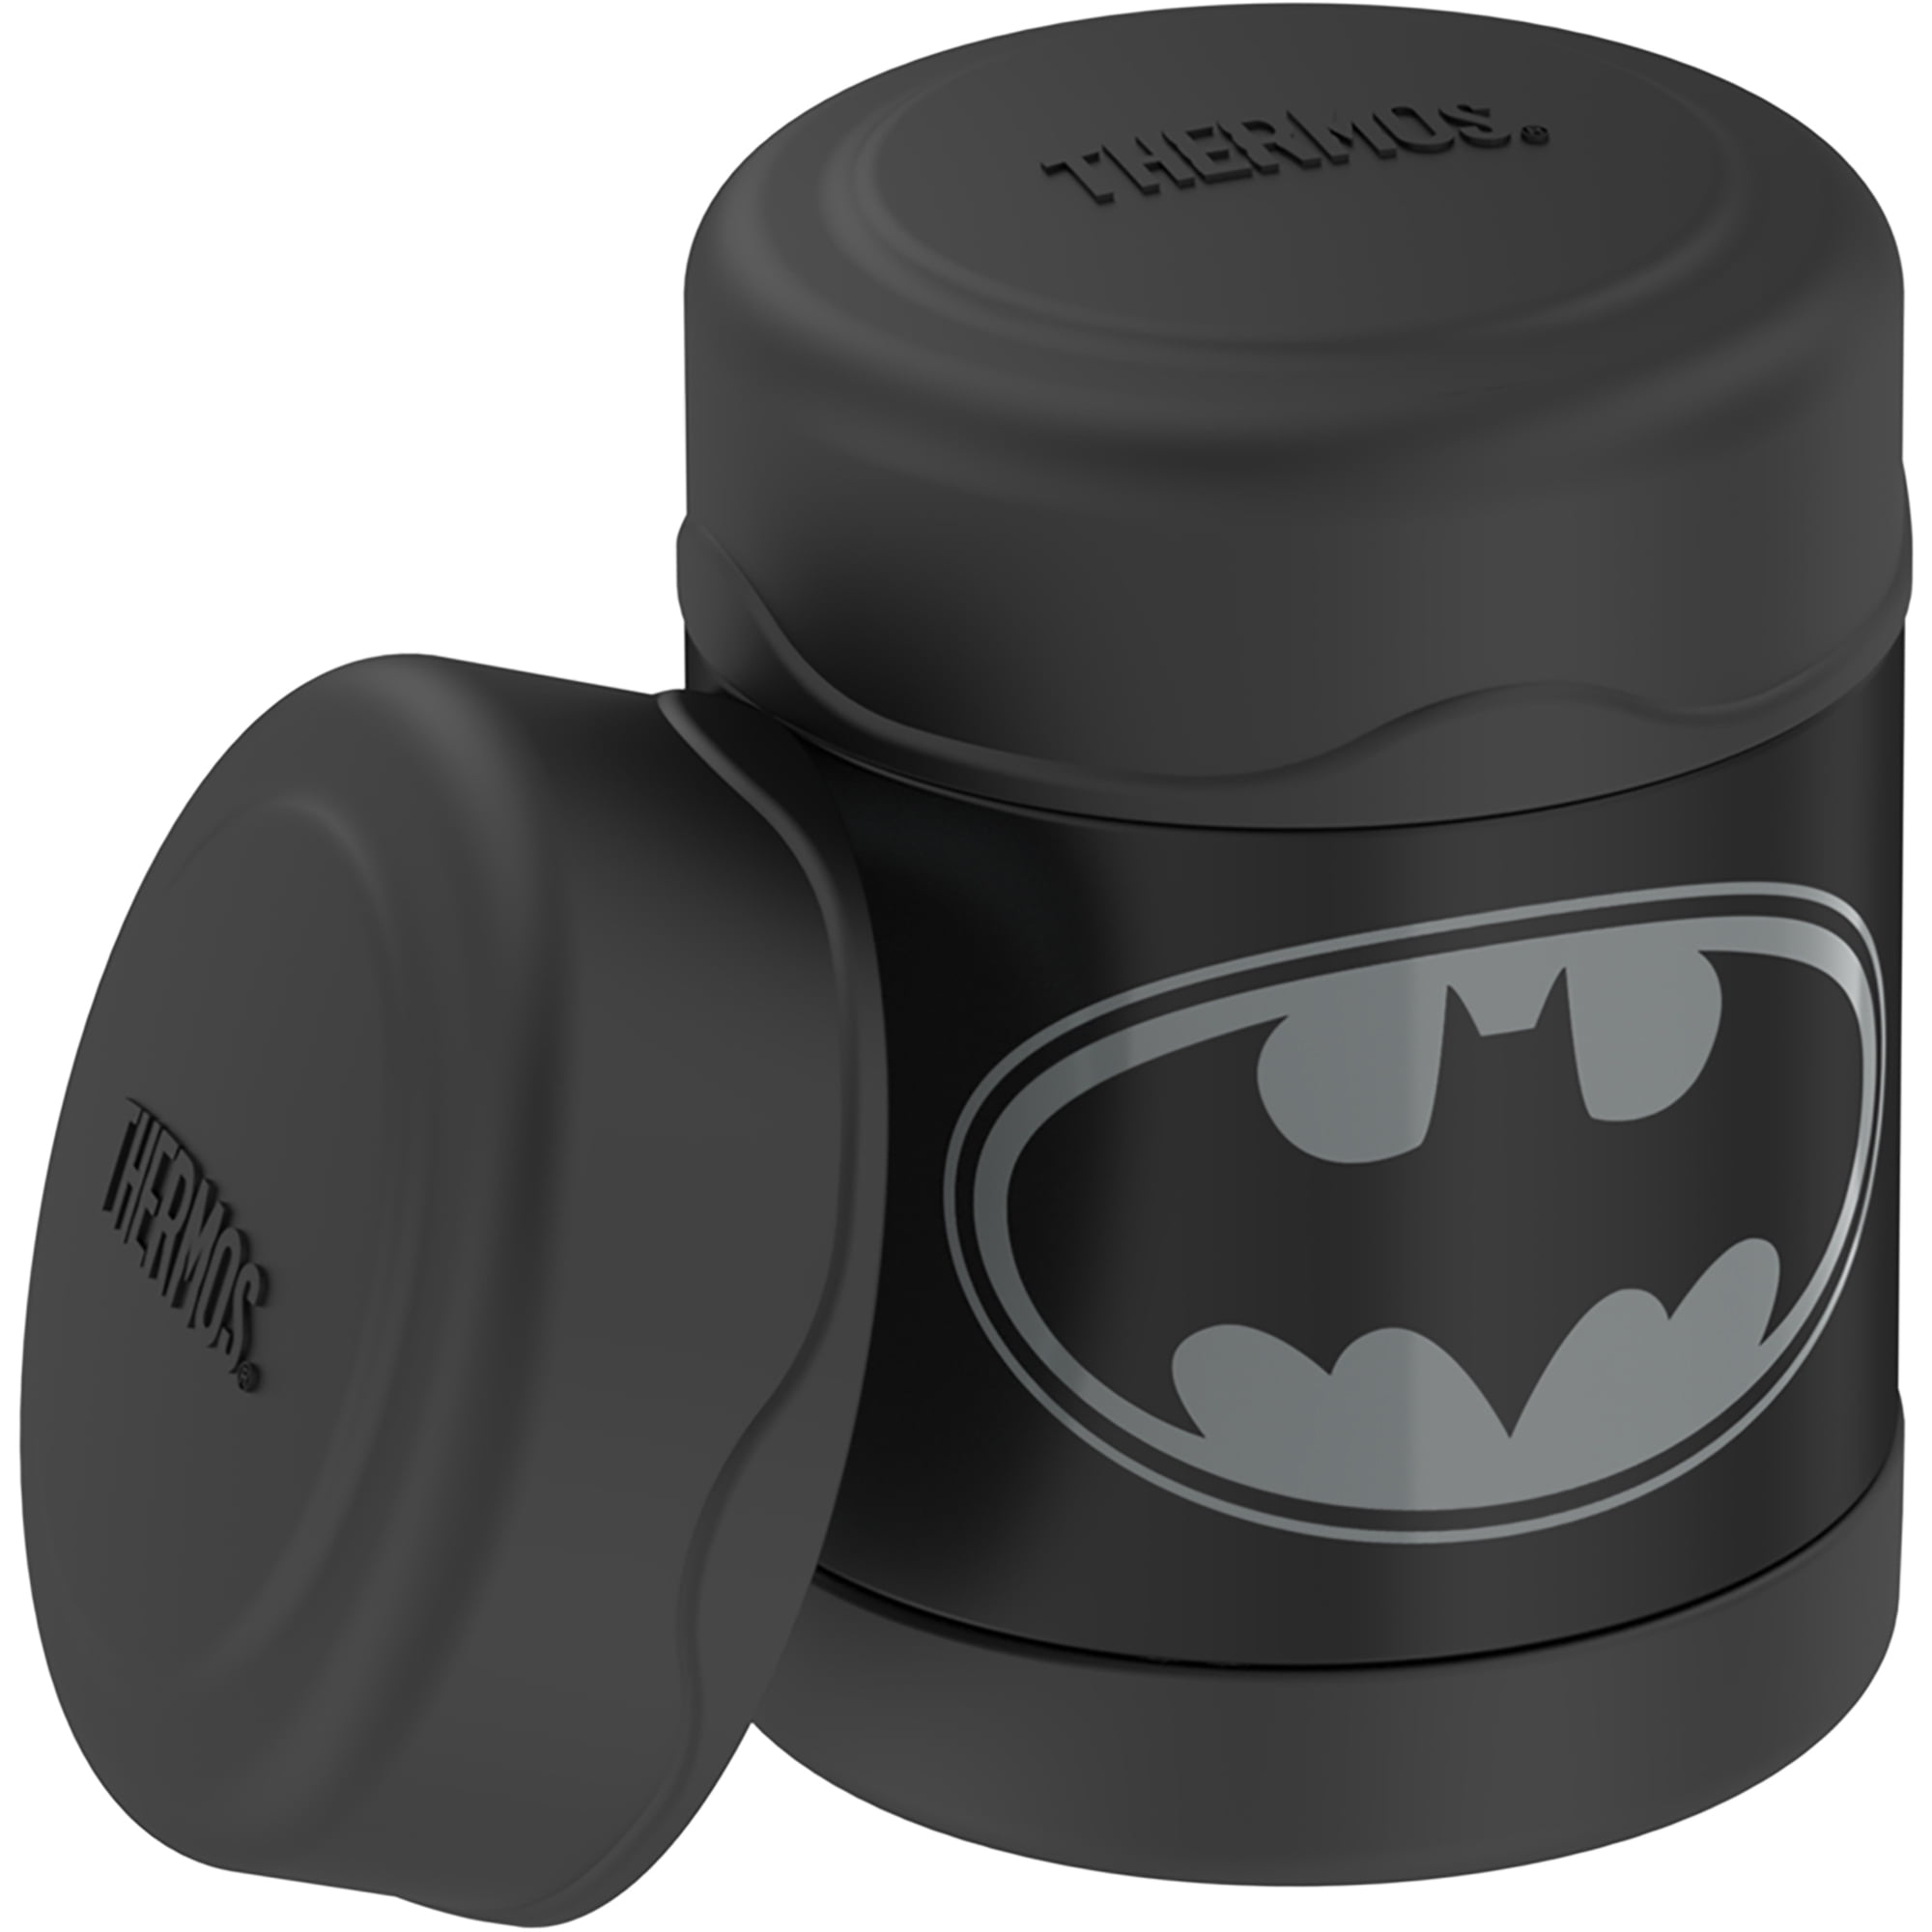 Thermos, Accessories, Nwt Thermos Batman With Cape Insulated Lunch Bag